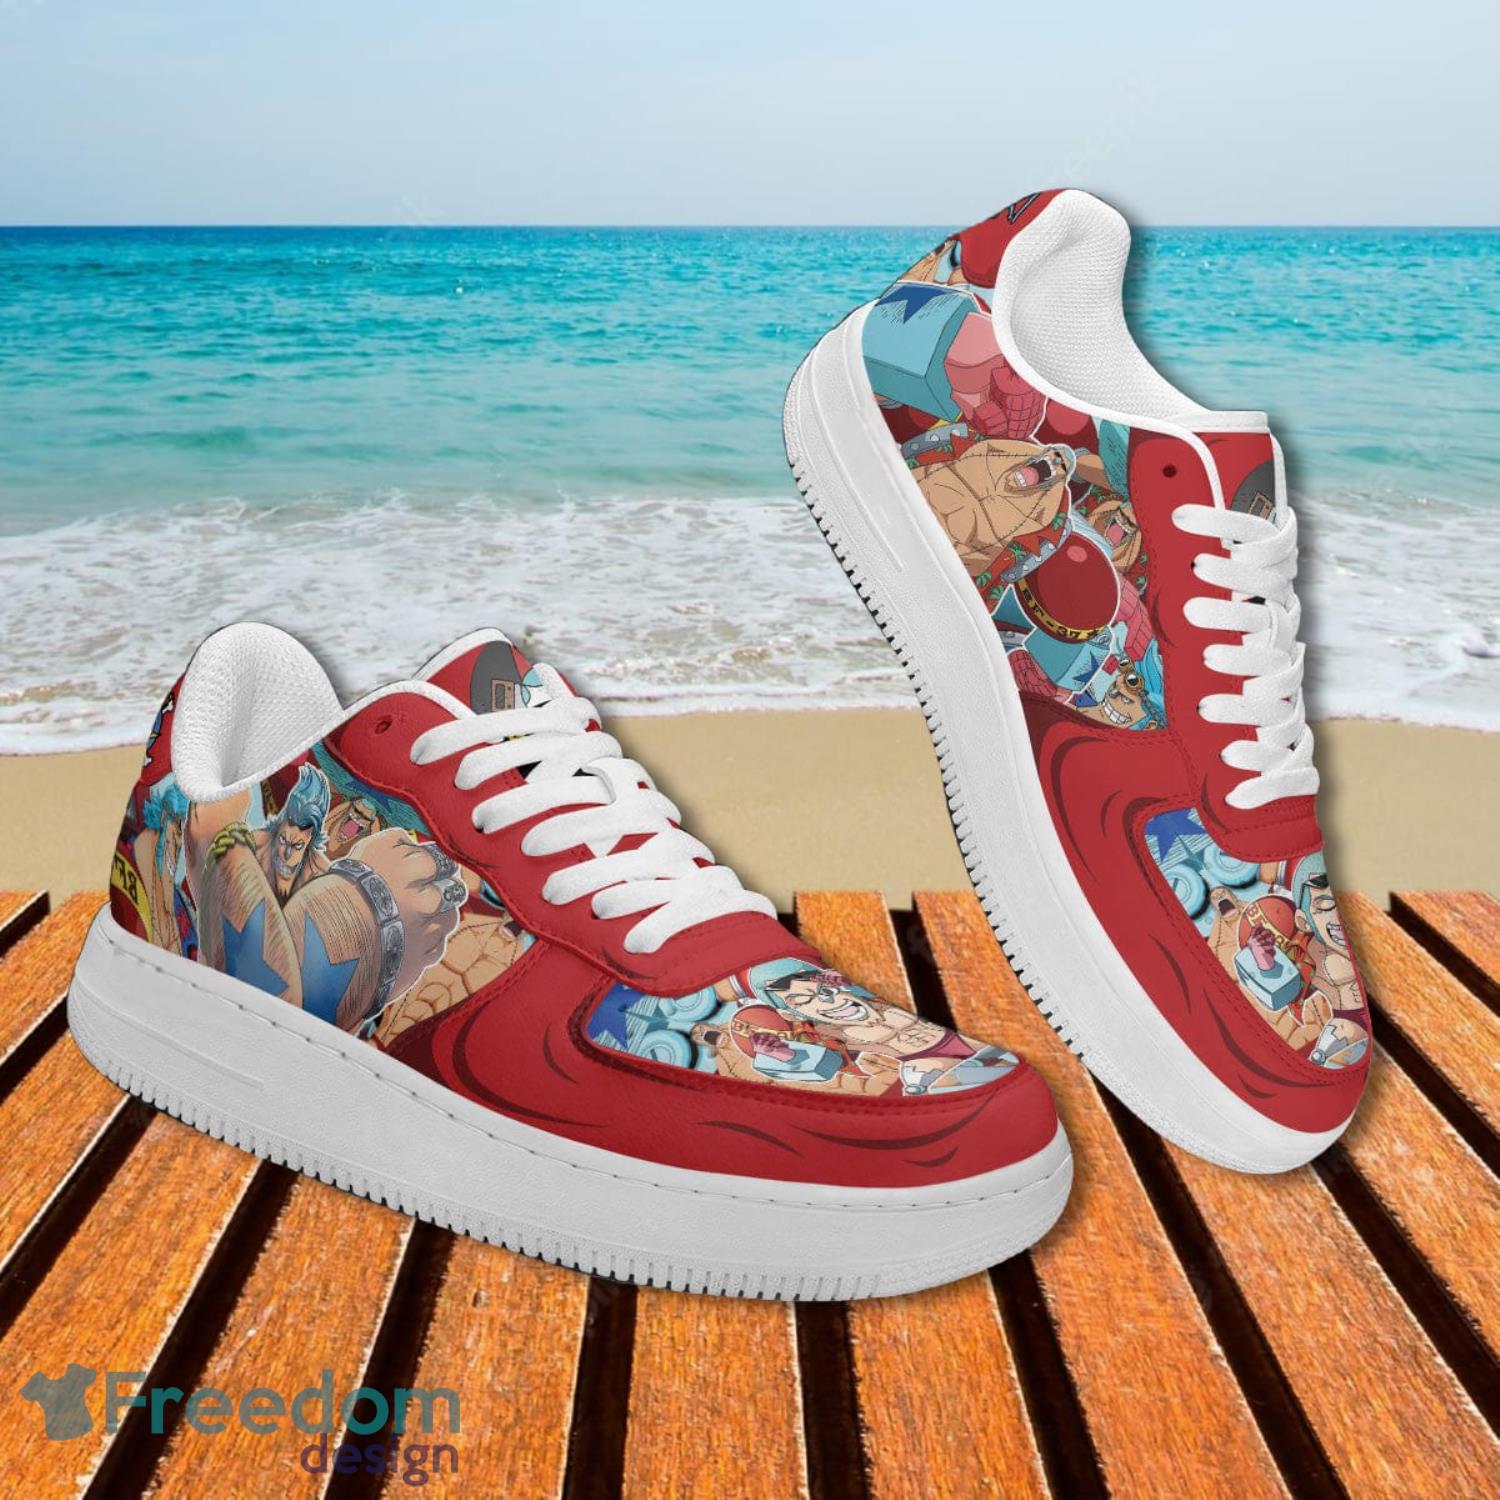 One Piece Franky Air Force Shoes Gift For Anime's Fans